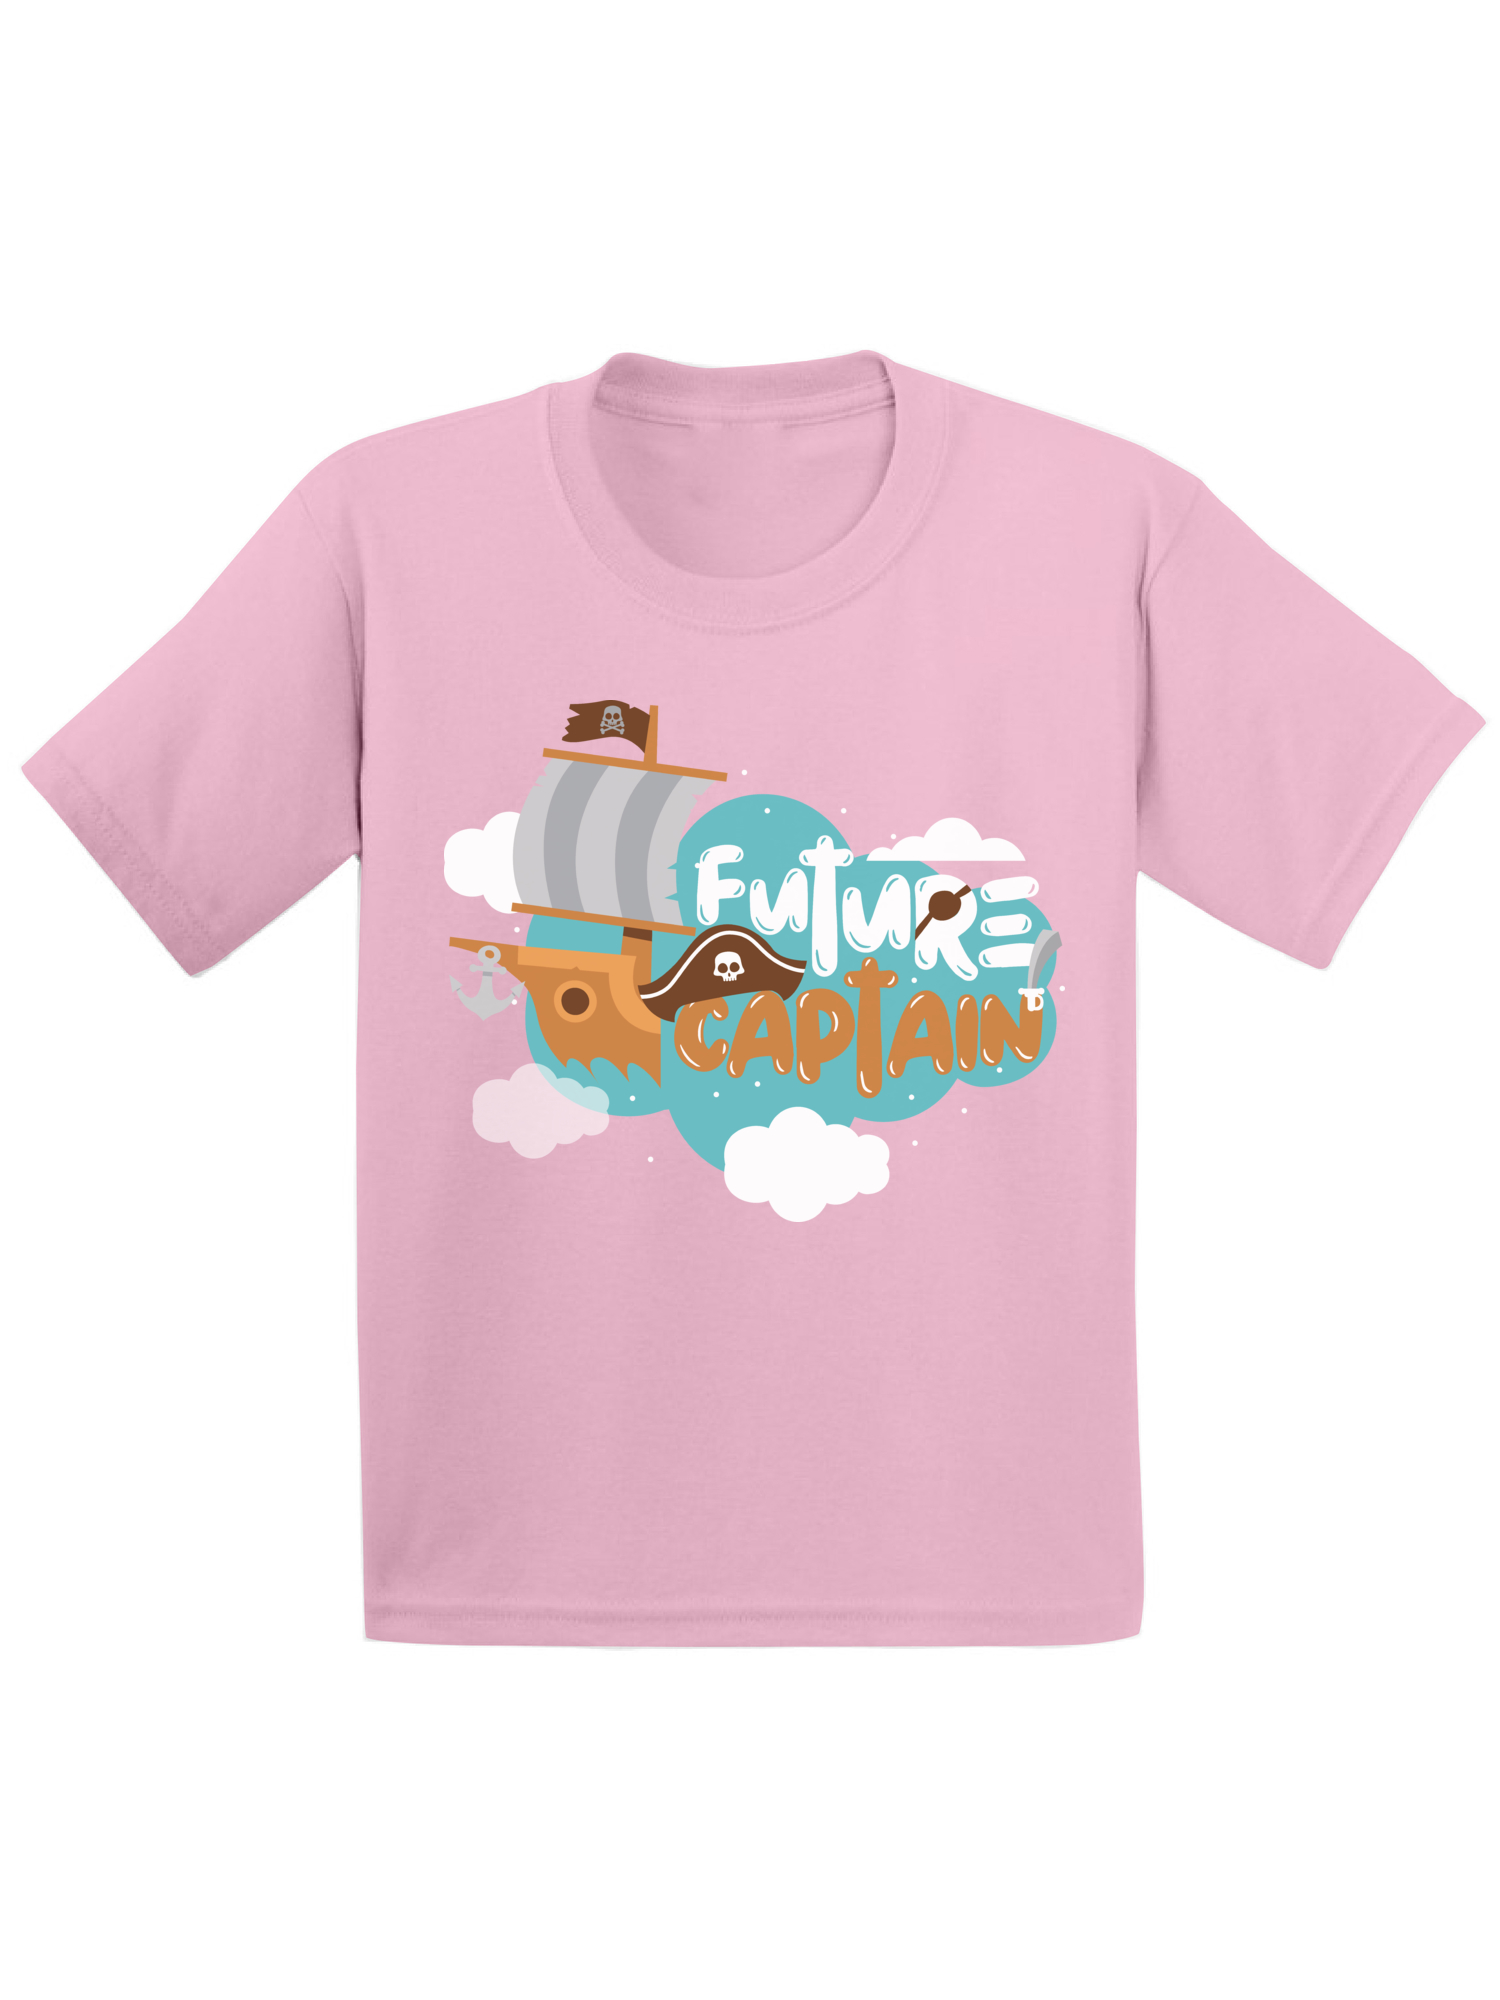 Awkward Styles Future Captain Toddler Shirt Kids Future Job Shirts Funny Captain TShirts for Boys Funny Captain TShirts for Girls Cute Birthday Gifts Kids Sailor T shirts Pirate Birthday Party - image 1 of 4